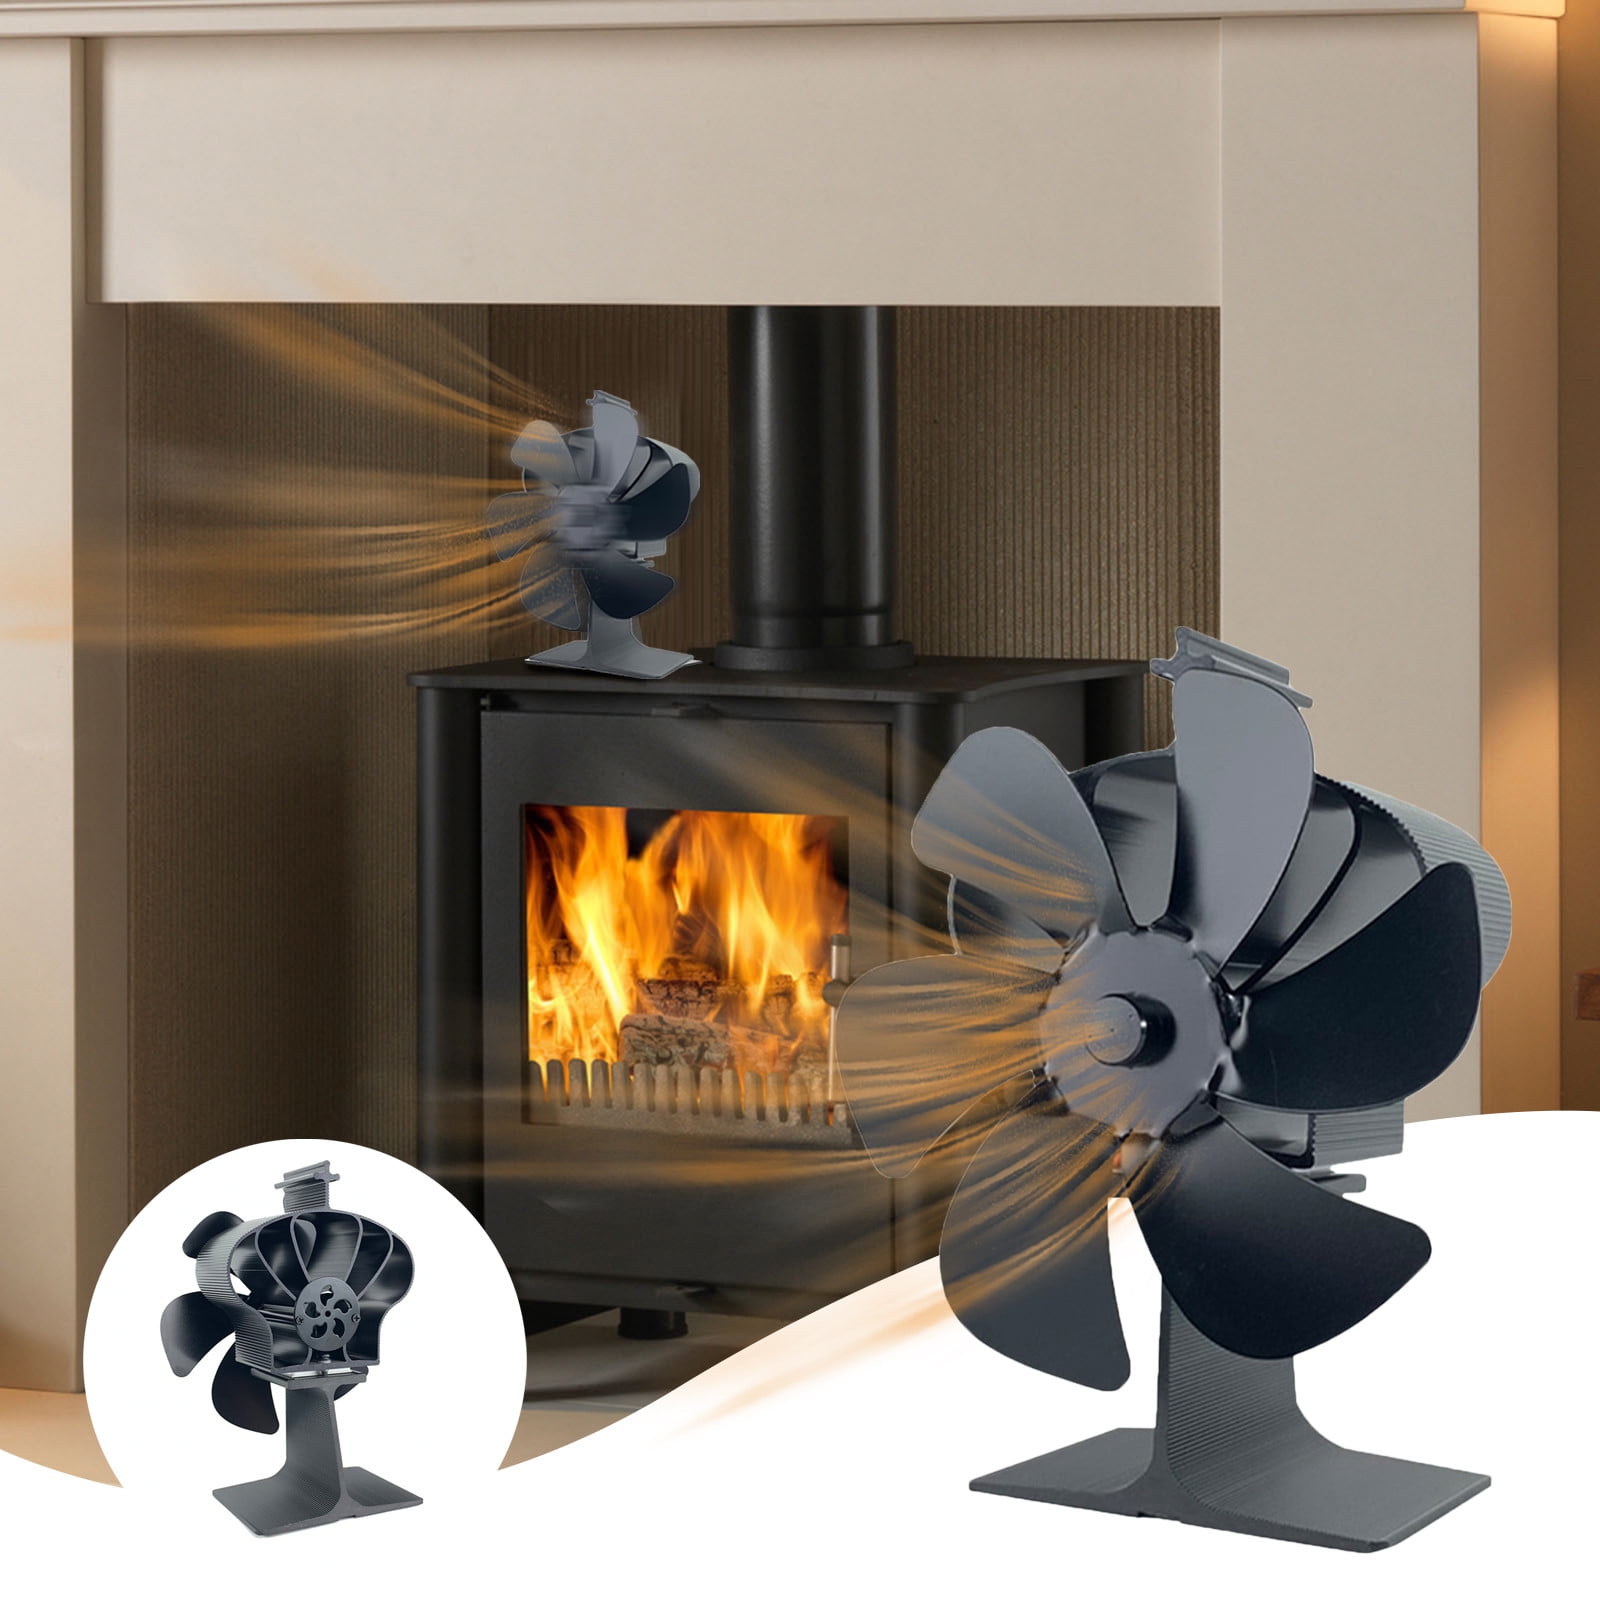 Wood Stove Fan, Fireplace Fan for Wood Burning Stove, Heat Powered